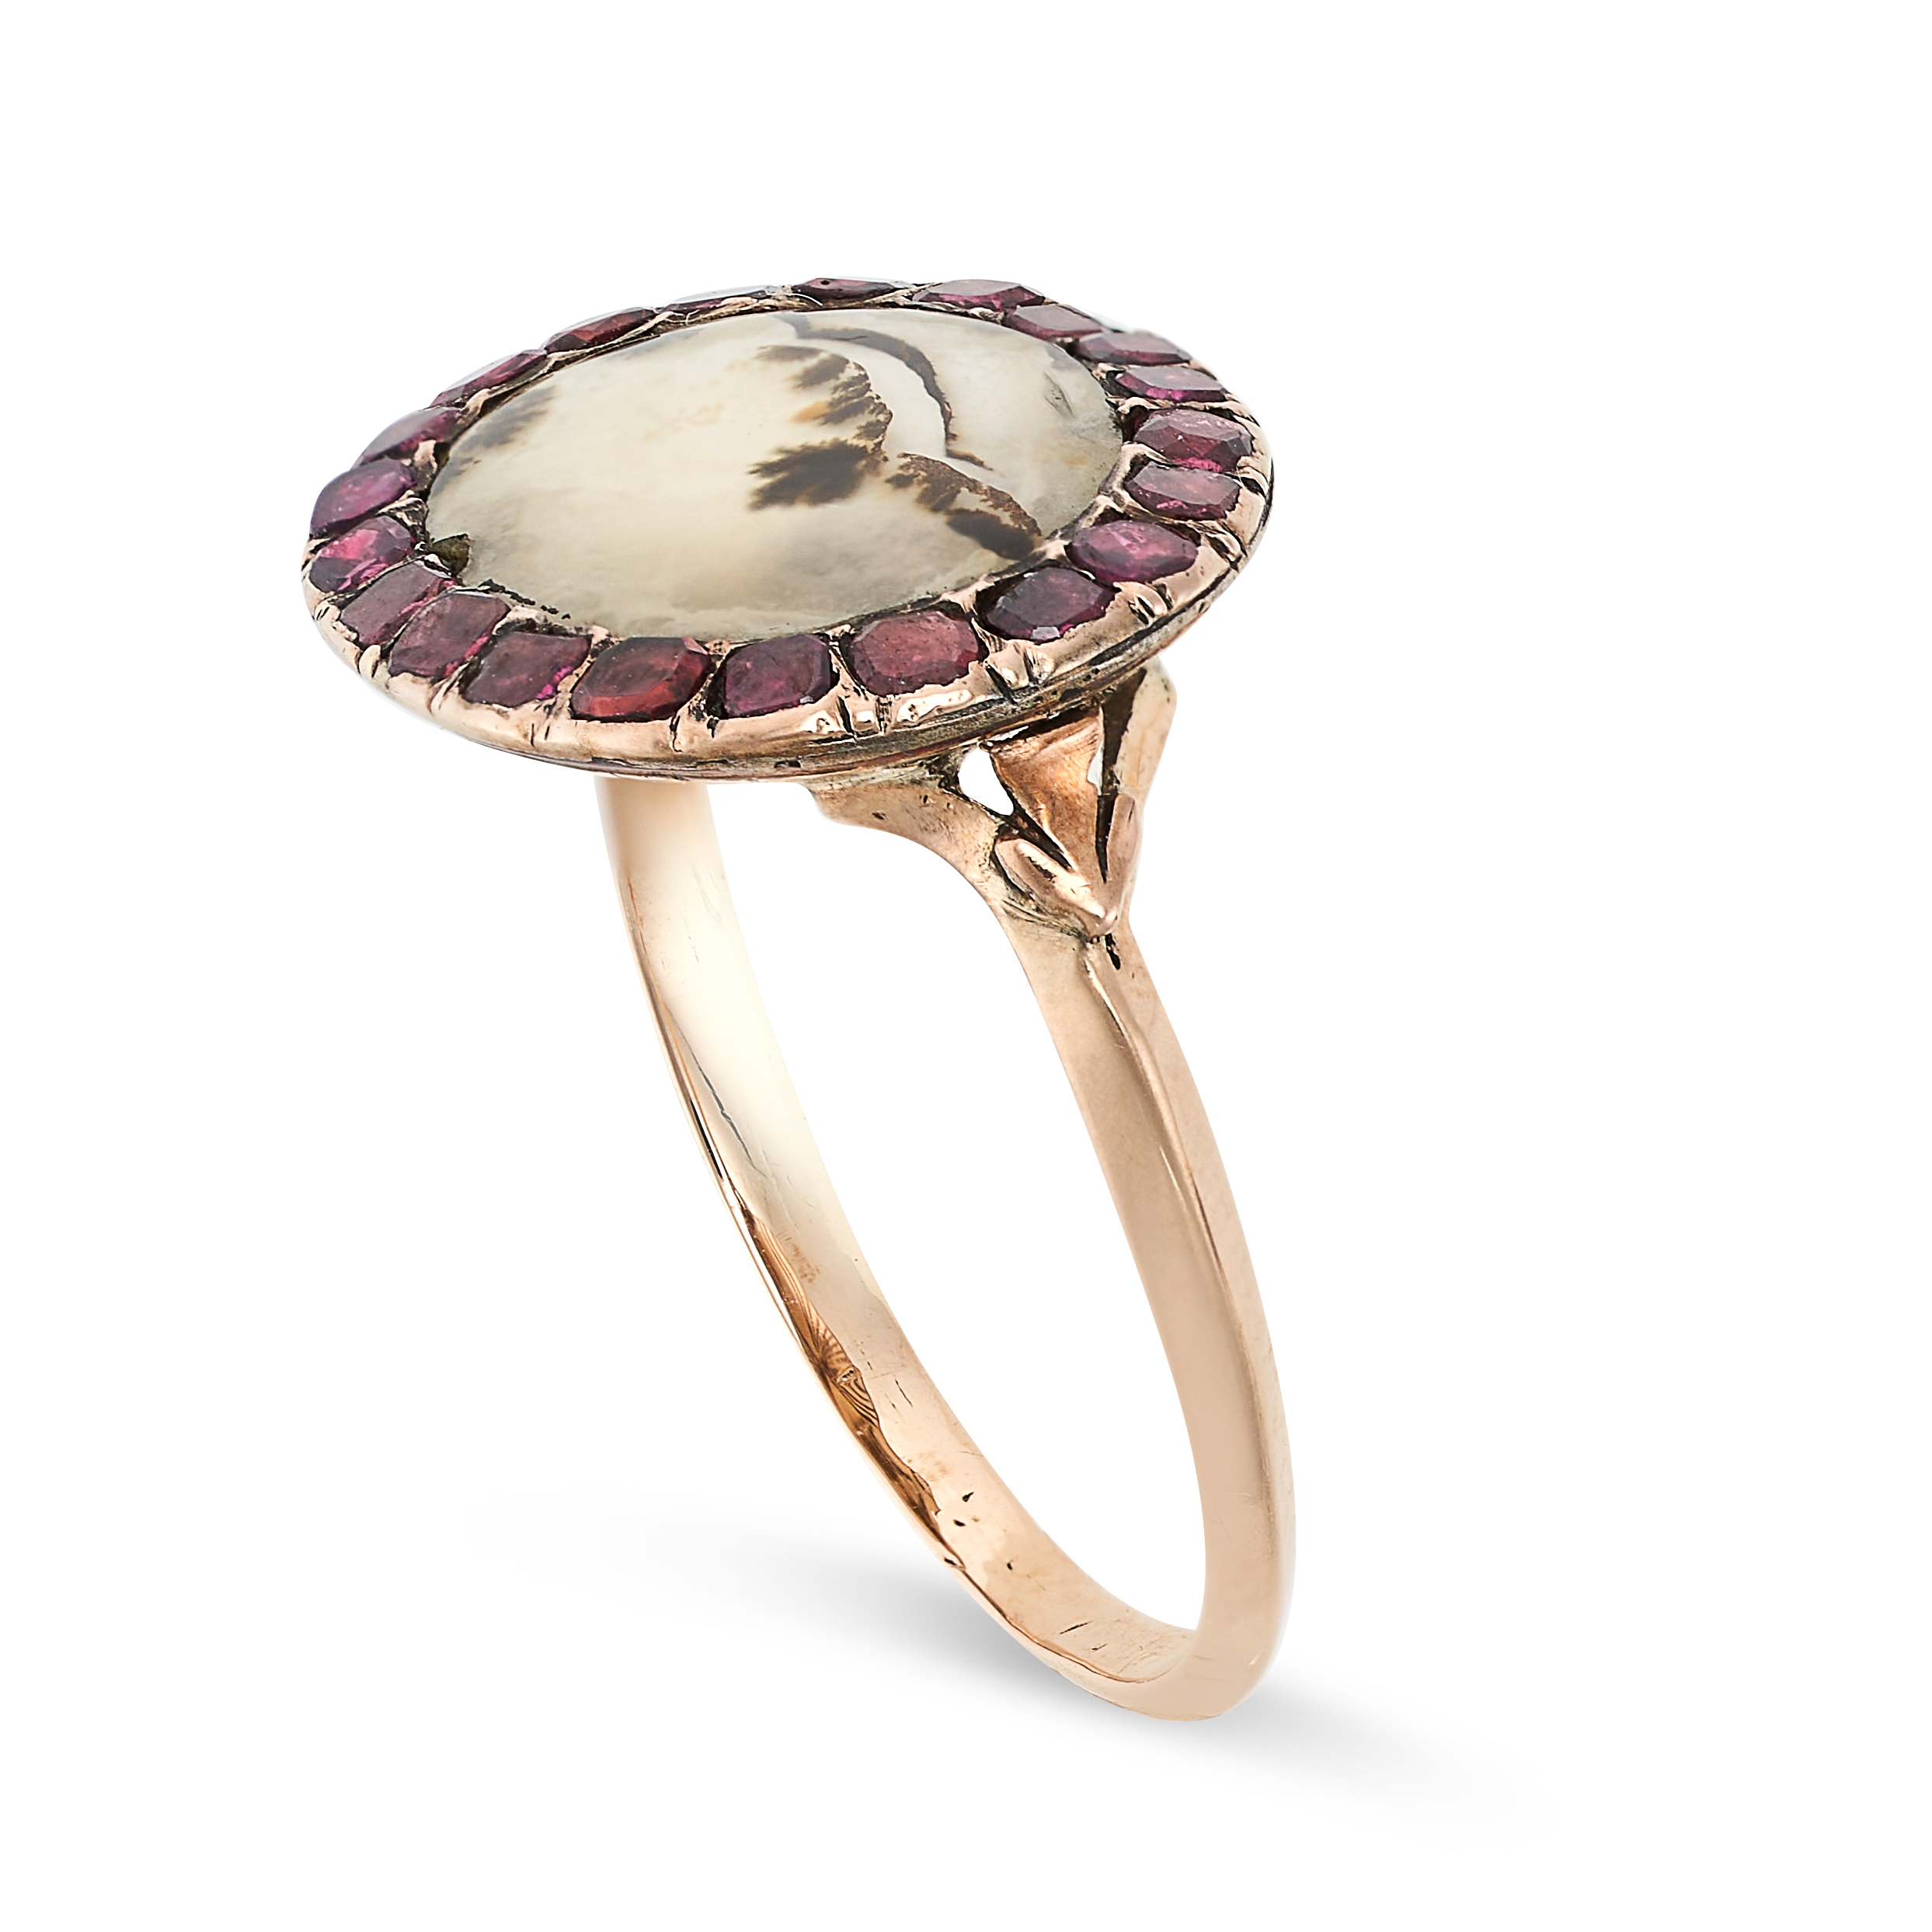 AN ANTIQUE DENDRITIC AGATE AND GARNET RING in yellow gold, set with an oval cabochon cut piece of - Image 2 of 2